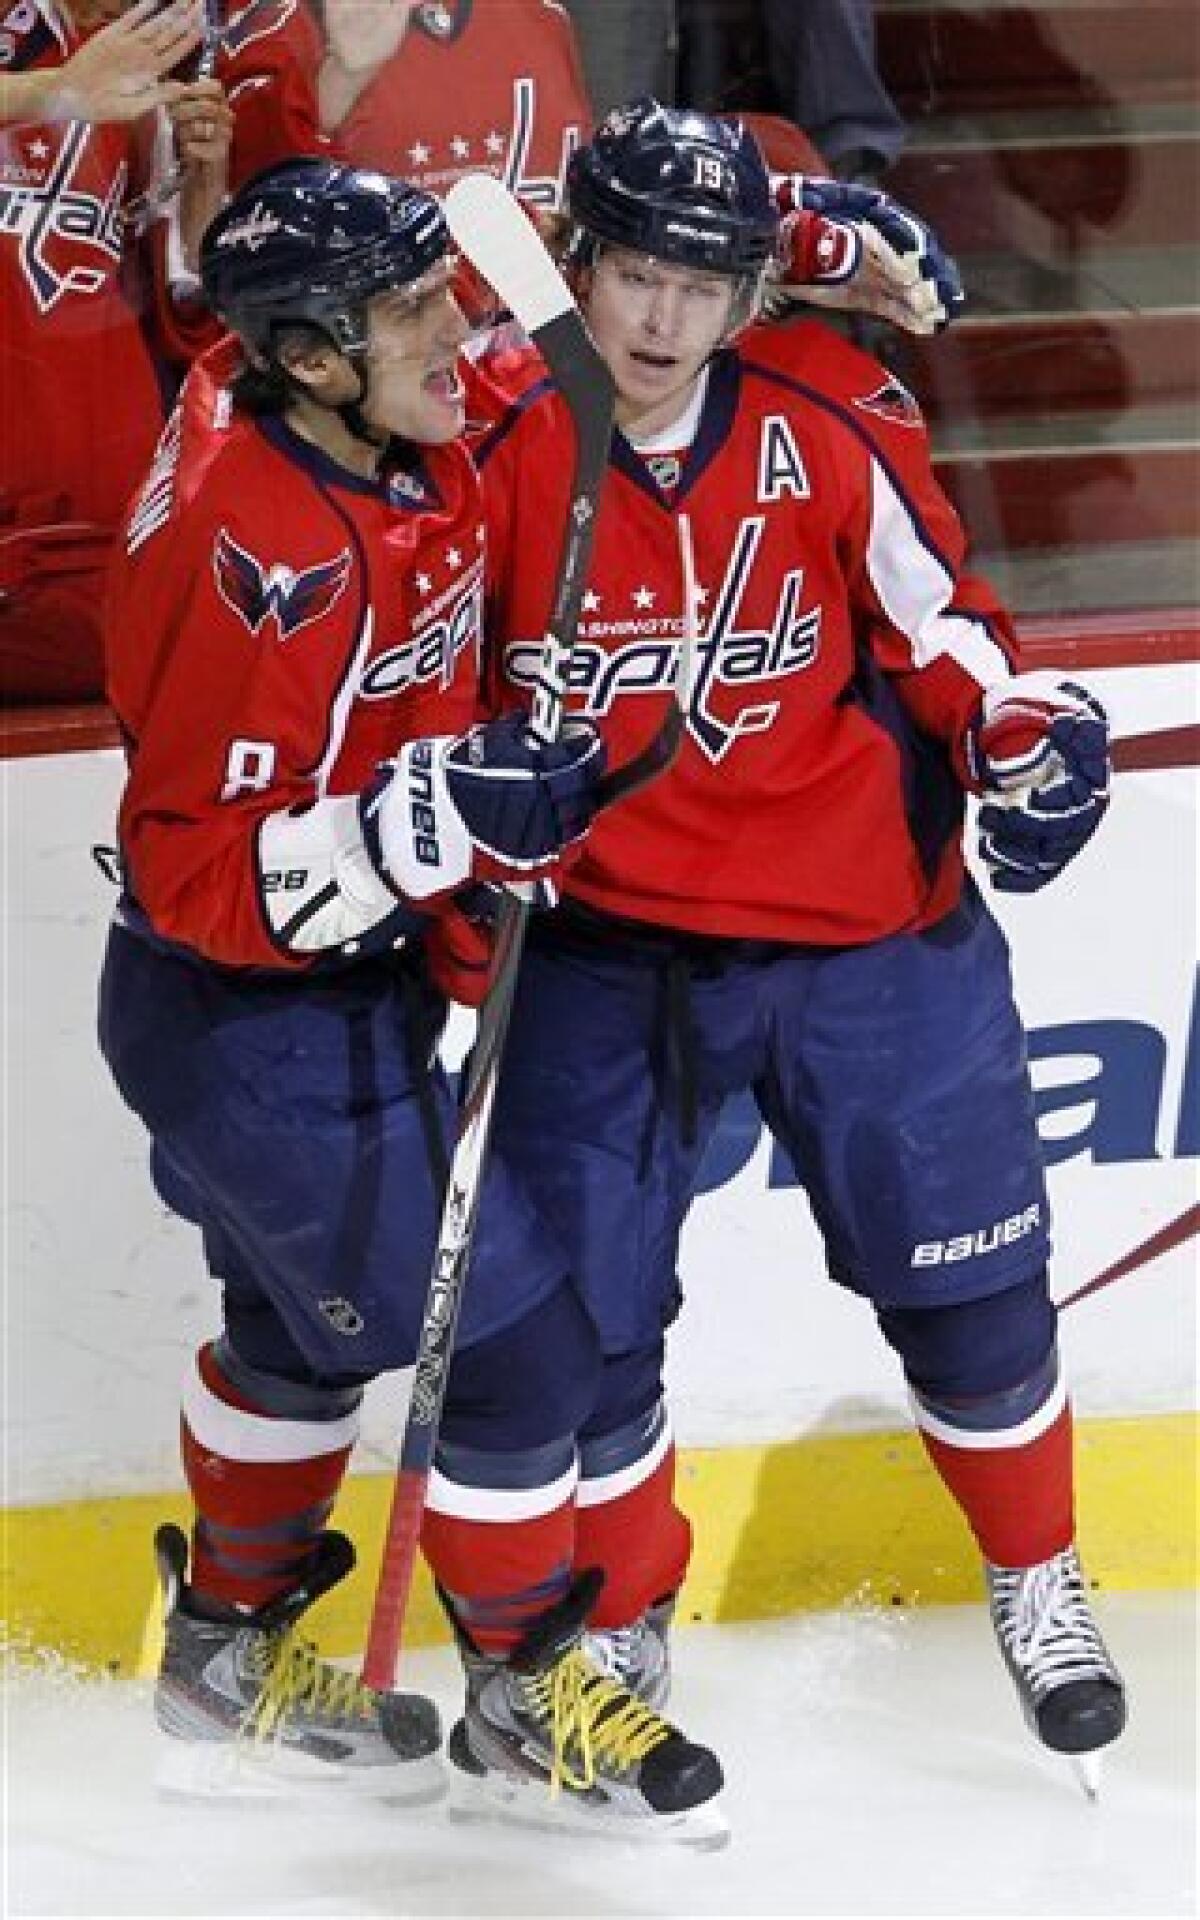 Capitals' Alex Ovechkin Voted Best Shot, Nicklas Backstrom Voted Best  Passer By NHL Players